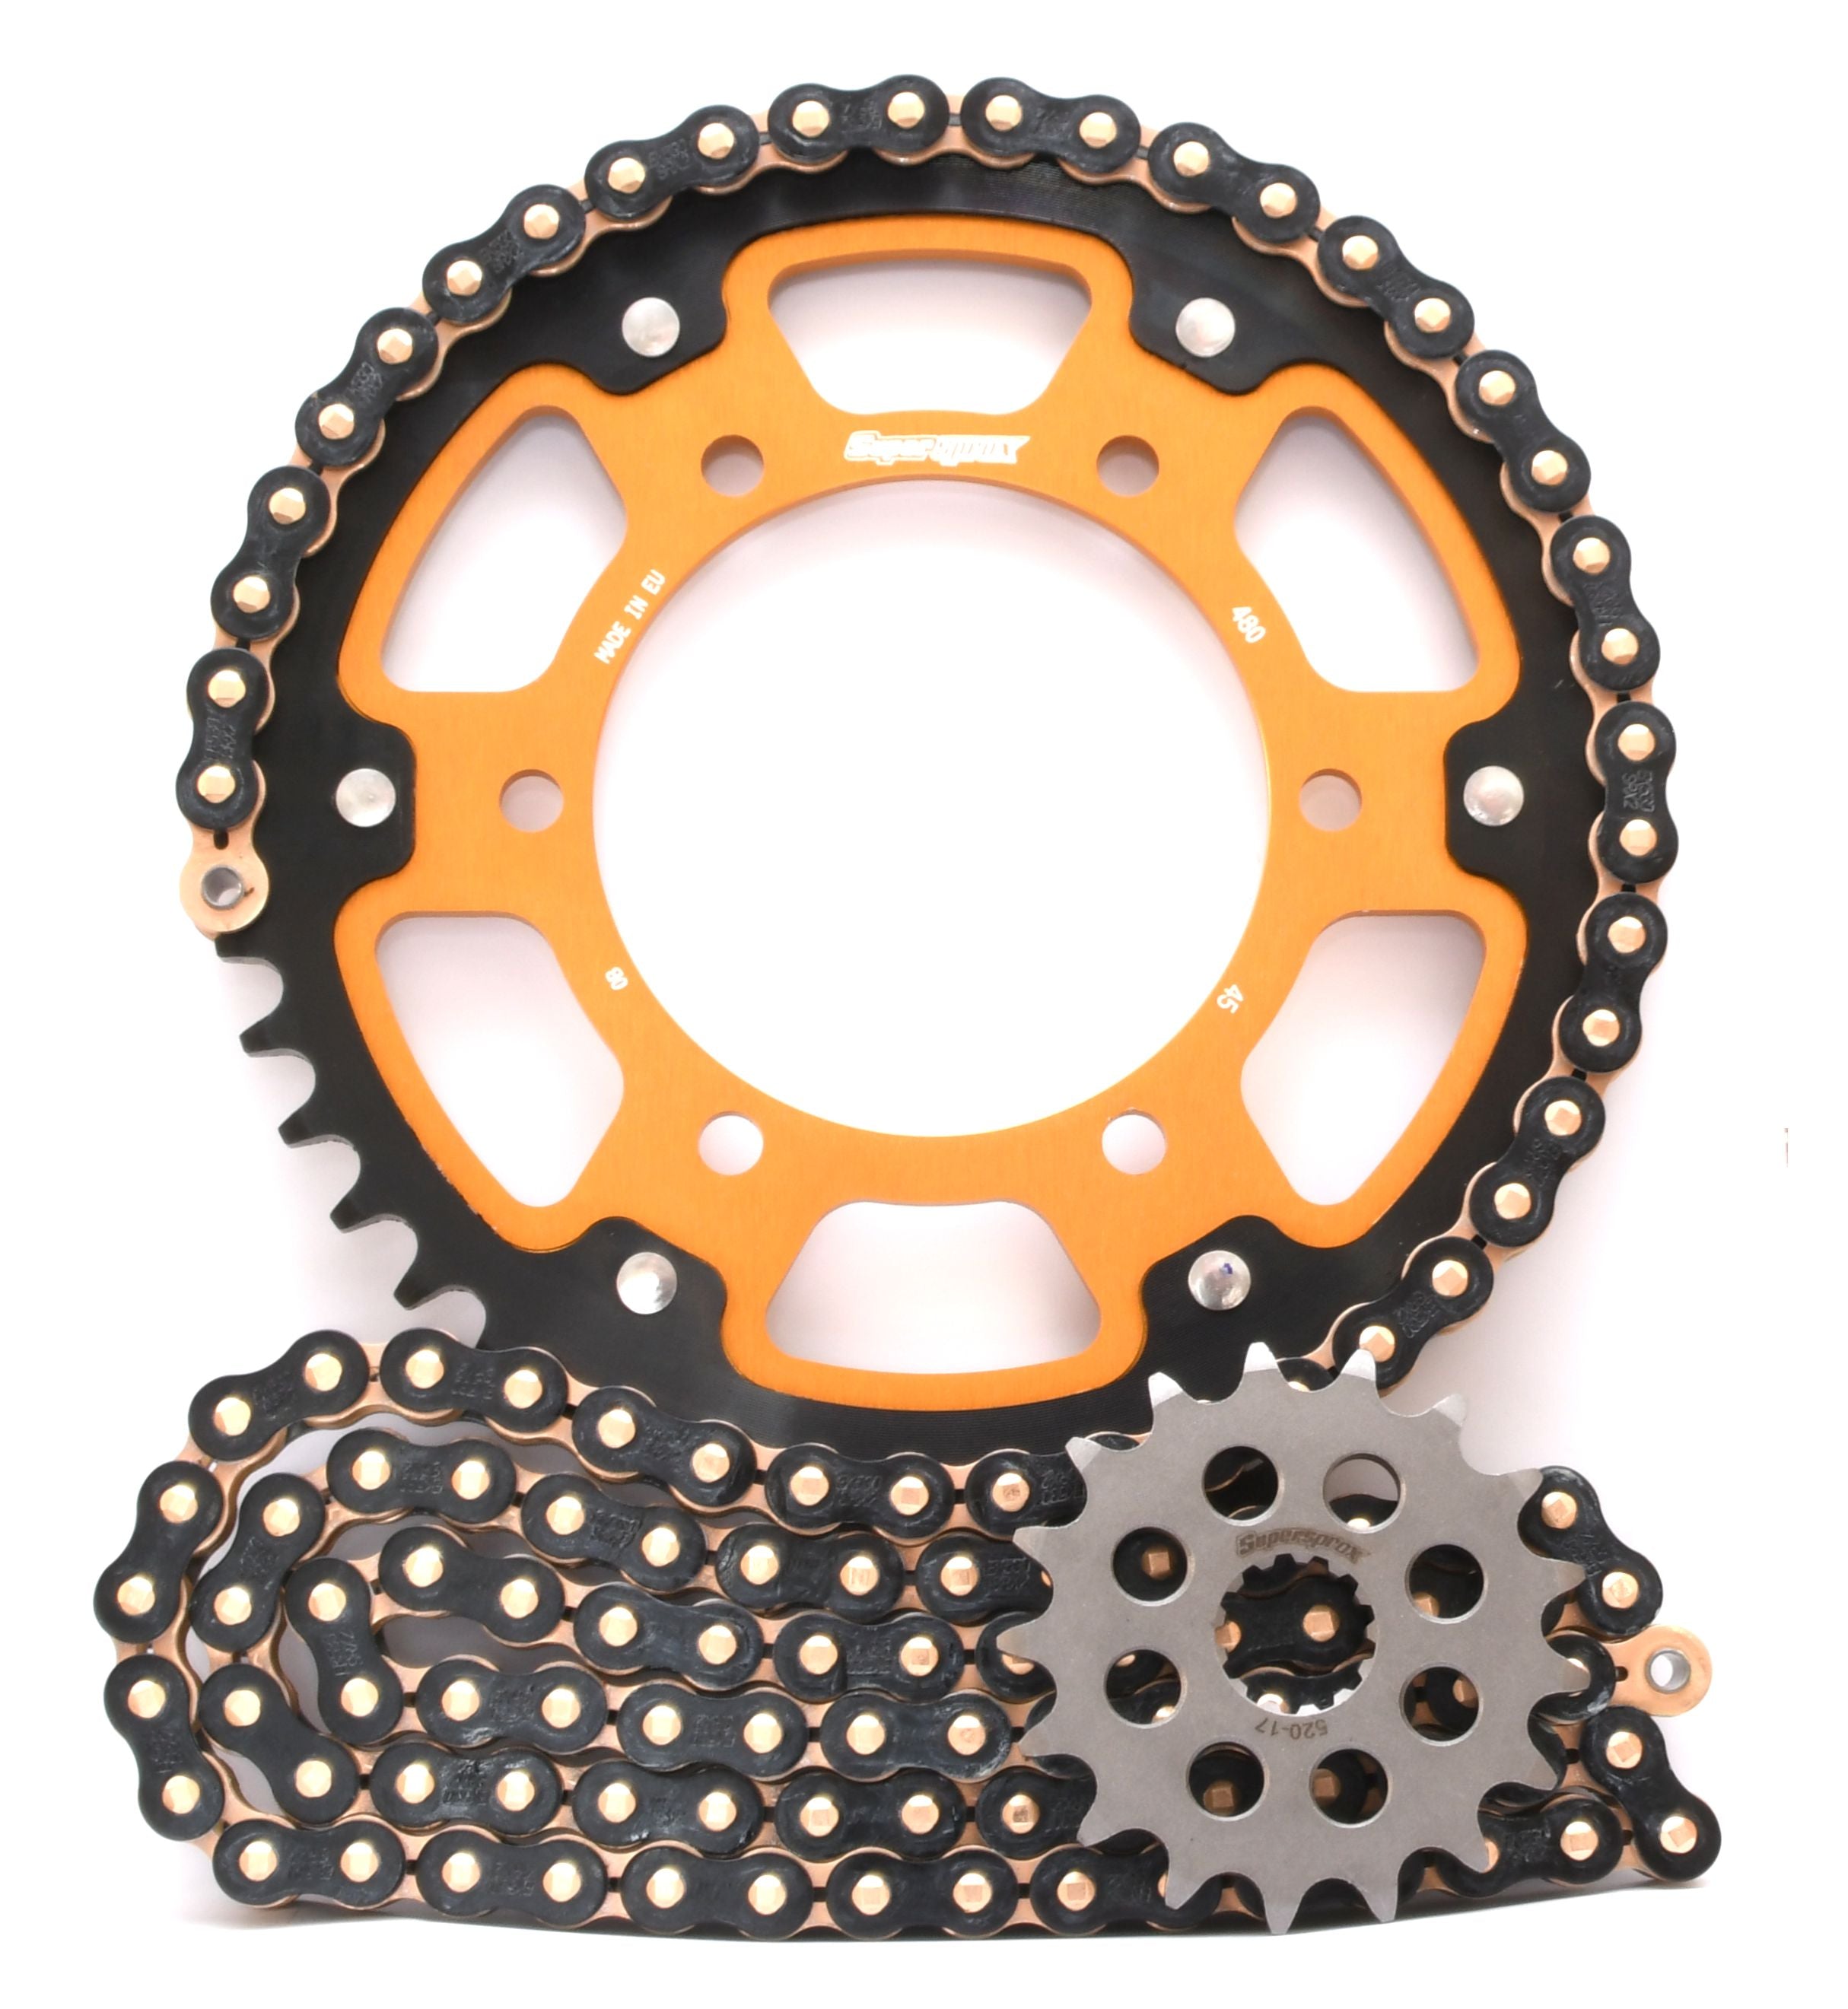 Supersprox Chain & Sprocket Kit for Yamaha YZF R1 2009-2014 - Standard Gearing